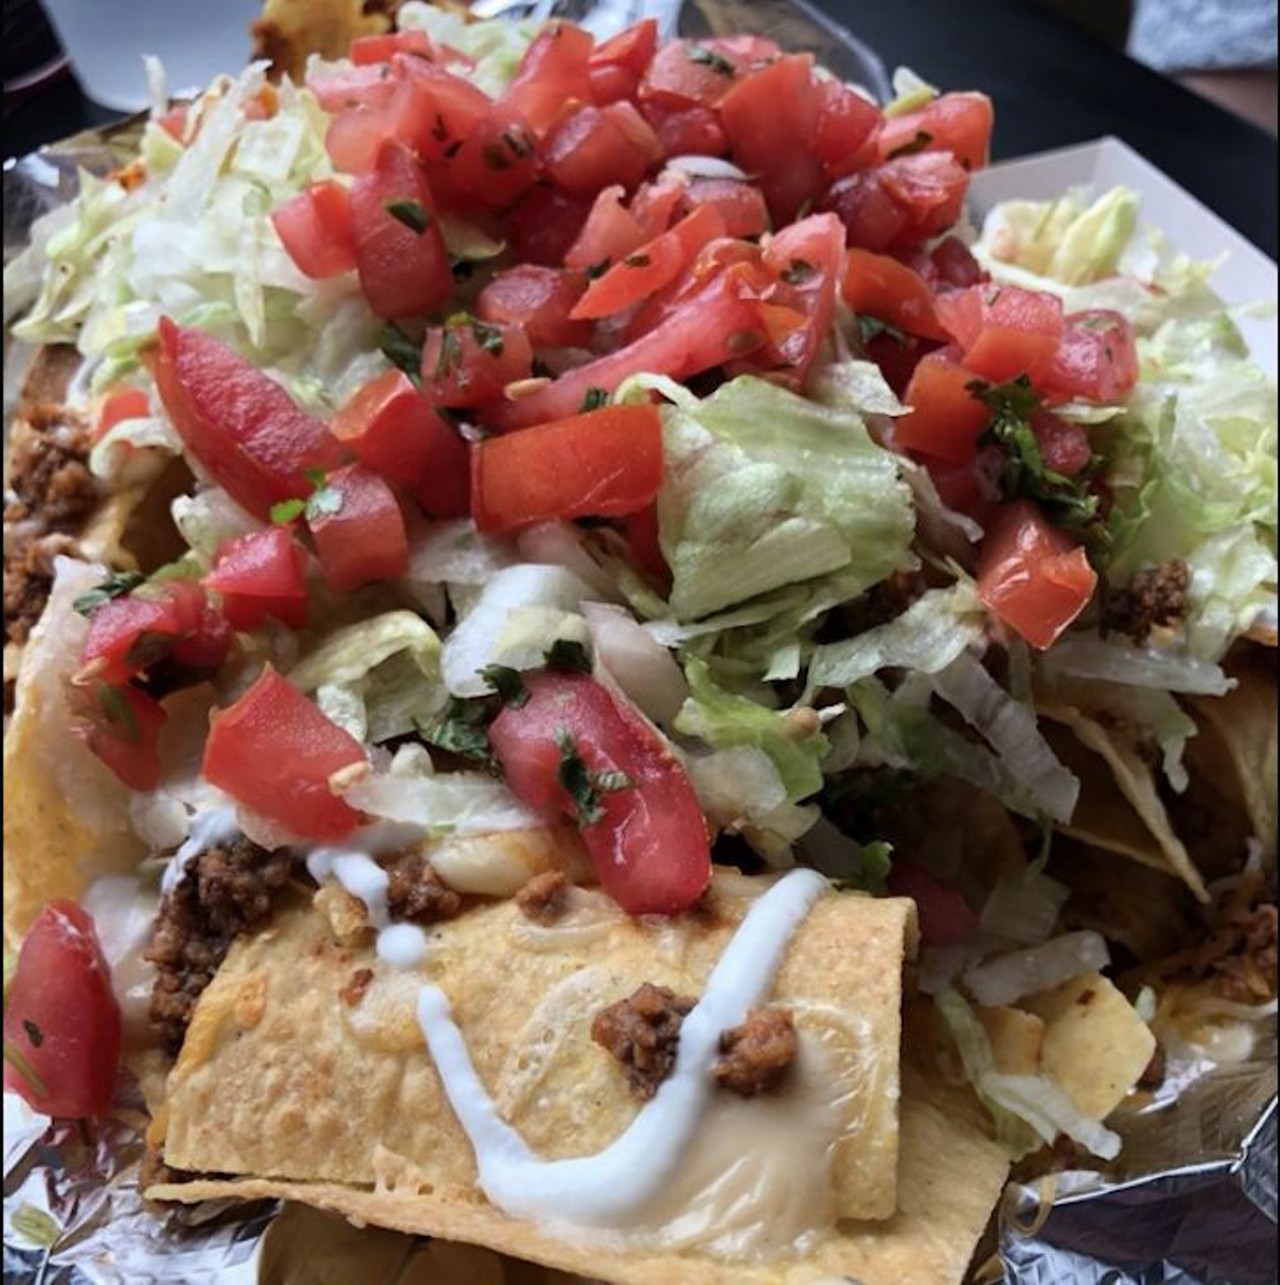 Gringos Locos: O.G. Nachos  
Multiple locations
Who said you can&#146;t eat just chips for dinner? The O.G. nachos at Gringos are a whole meal. They&#146;re nachos layered with cheese, queso, sour cream, lettuce and pico. If you want, add a little meat to those nachos, too.
Photo via Yelp/April B.